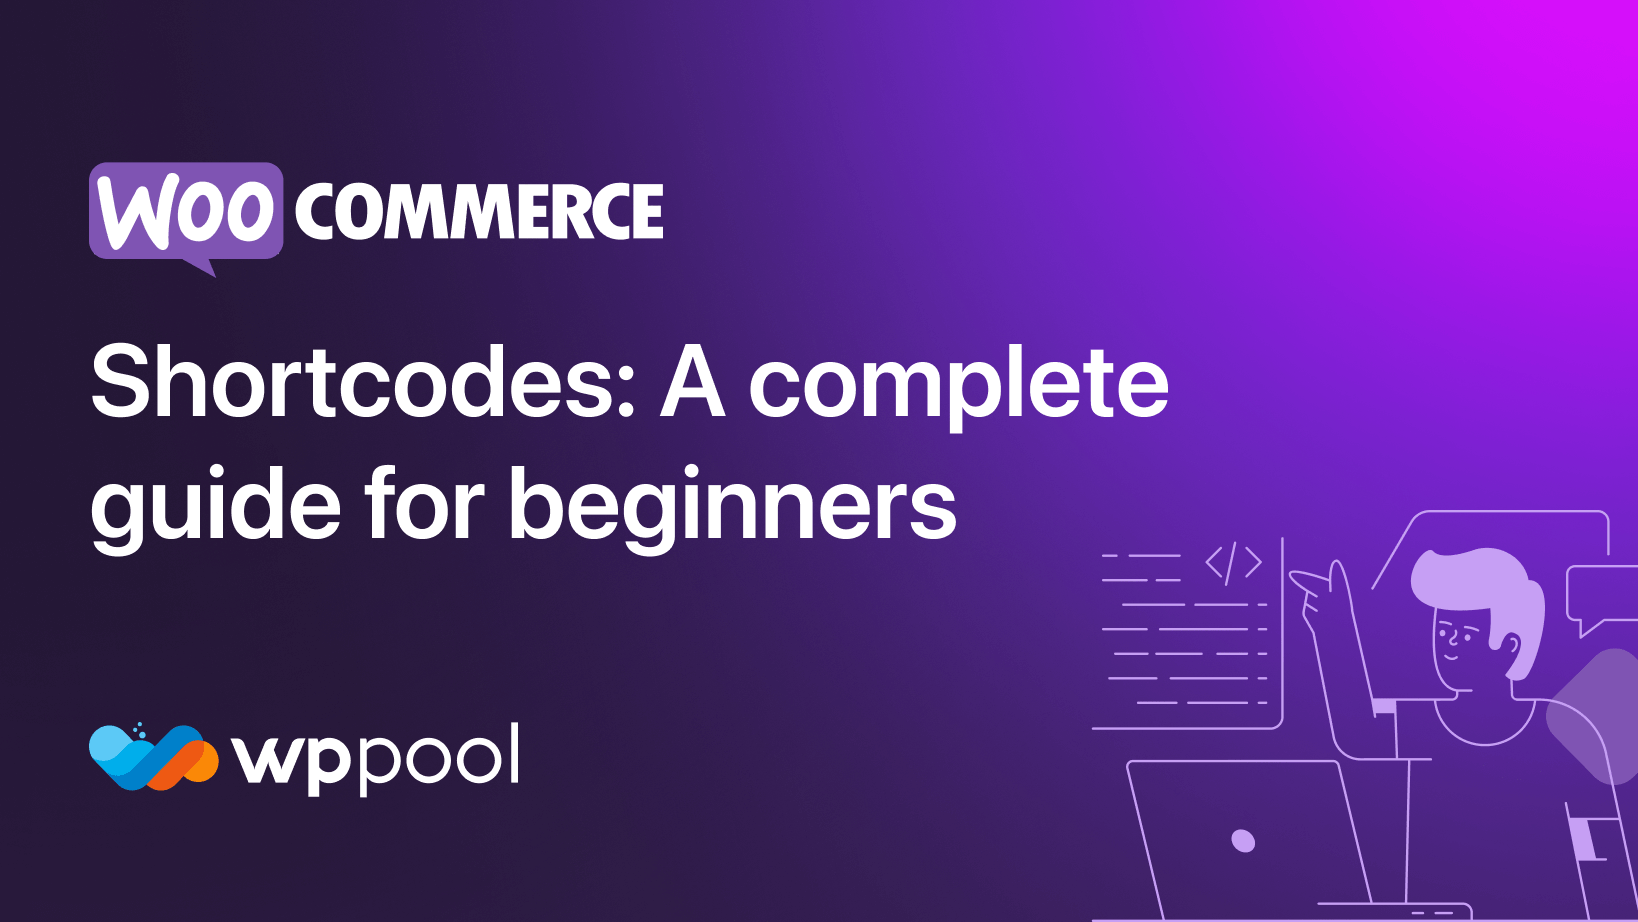 WooCommerce shortcodes: A complete guide for beginners